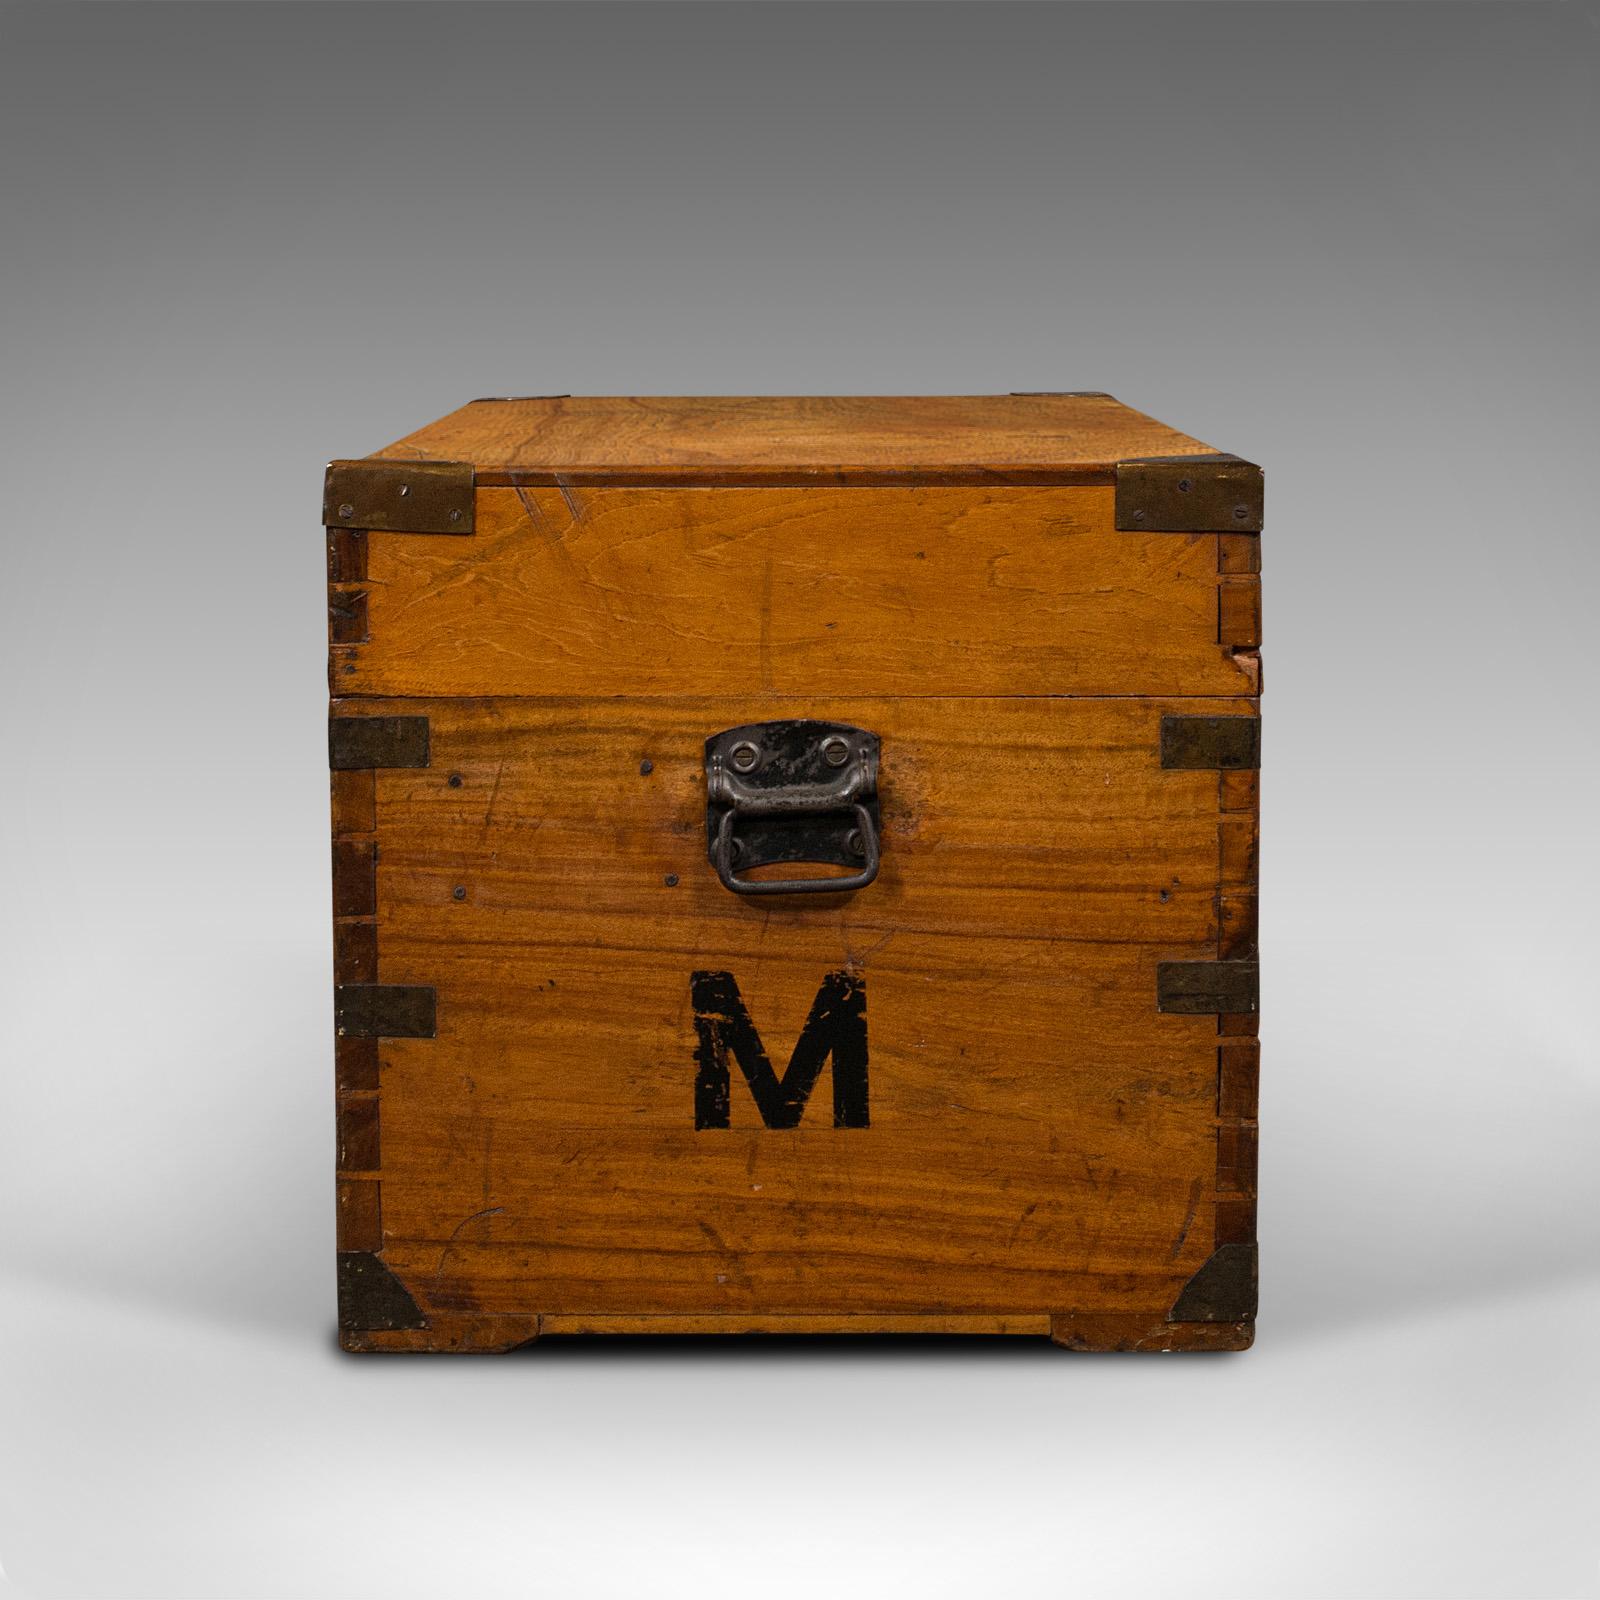 British Vintage Campaign Chest, English, Camphorwood, Military Travel Trunk, Circa 1930 For Sale